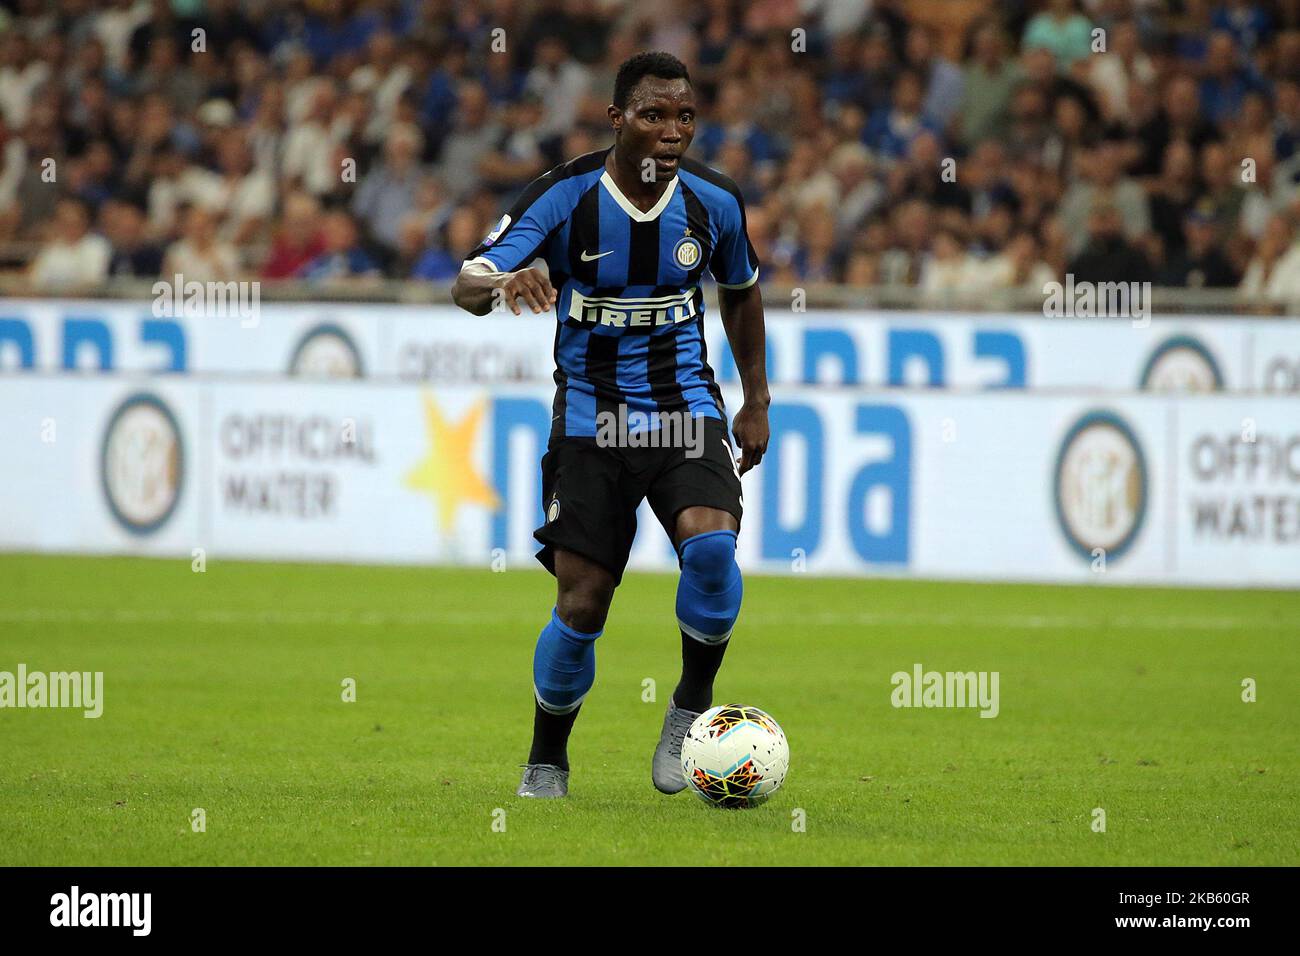 Kwadwo Asamoah of FC Internazionele in action during the Serie A match between of FC Internazionele and Udinese Calcio at Stadio Giuseppe Meazza on September 14, 2019 in Milan, Italy. (Photo by Giuseppe Cottini/NurPhoto) Stock Photo